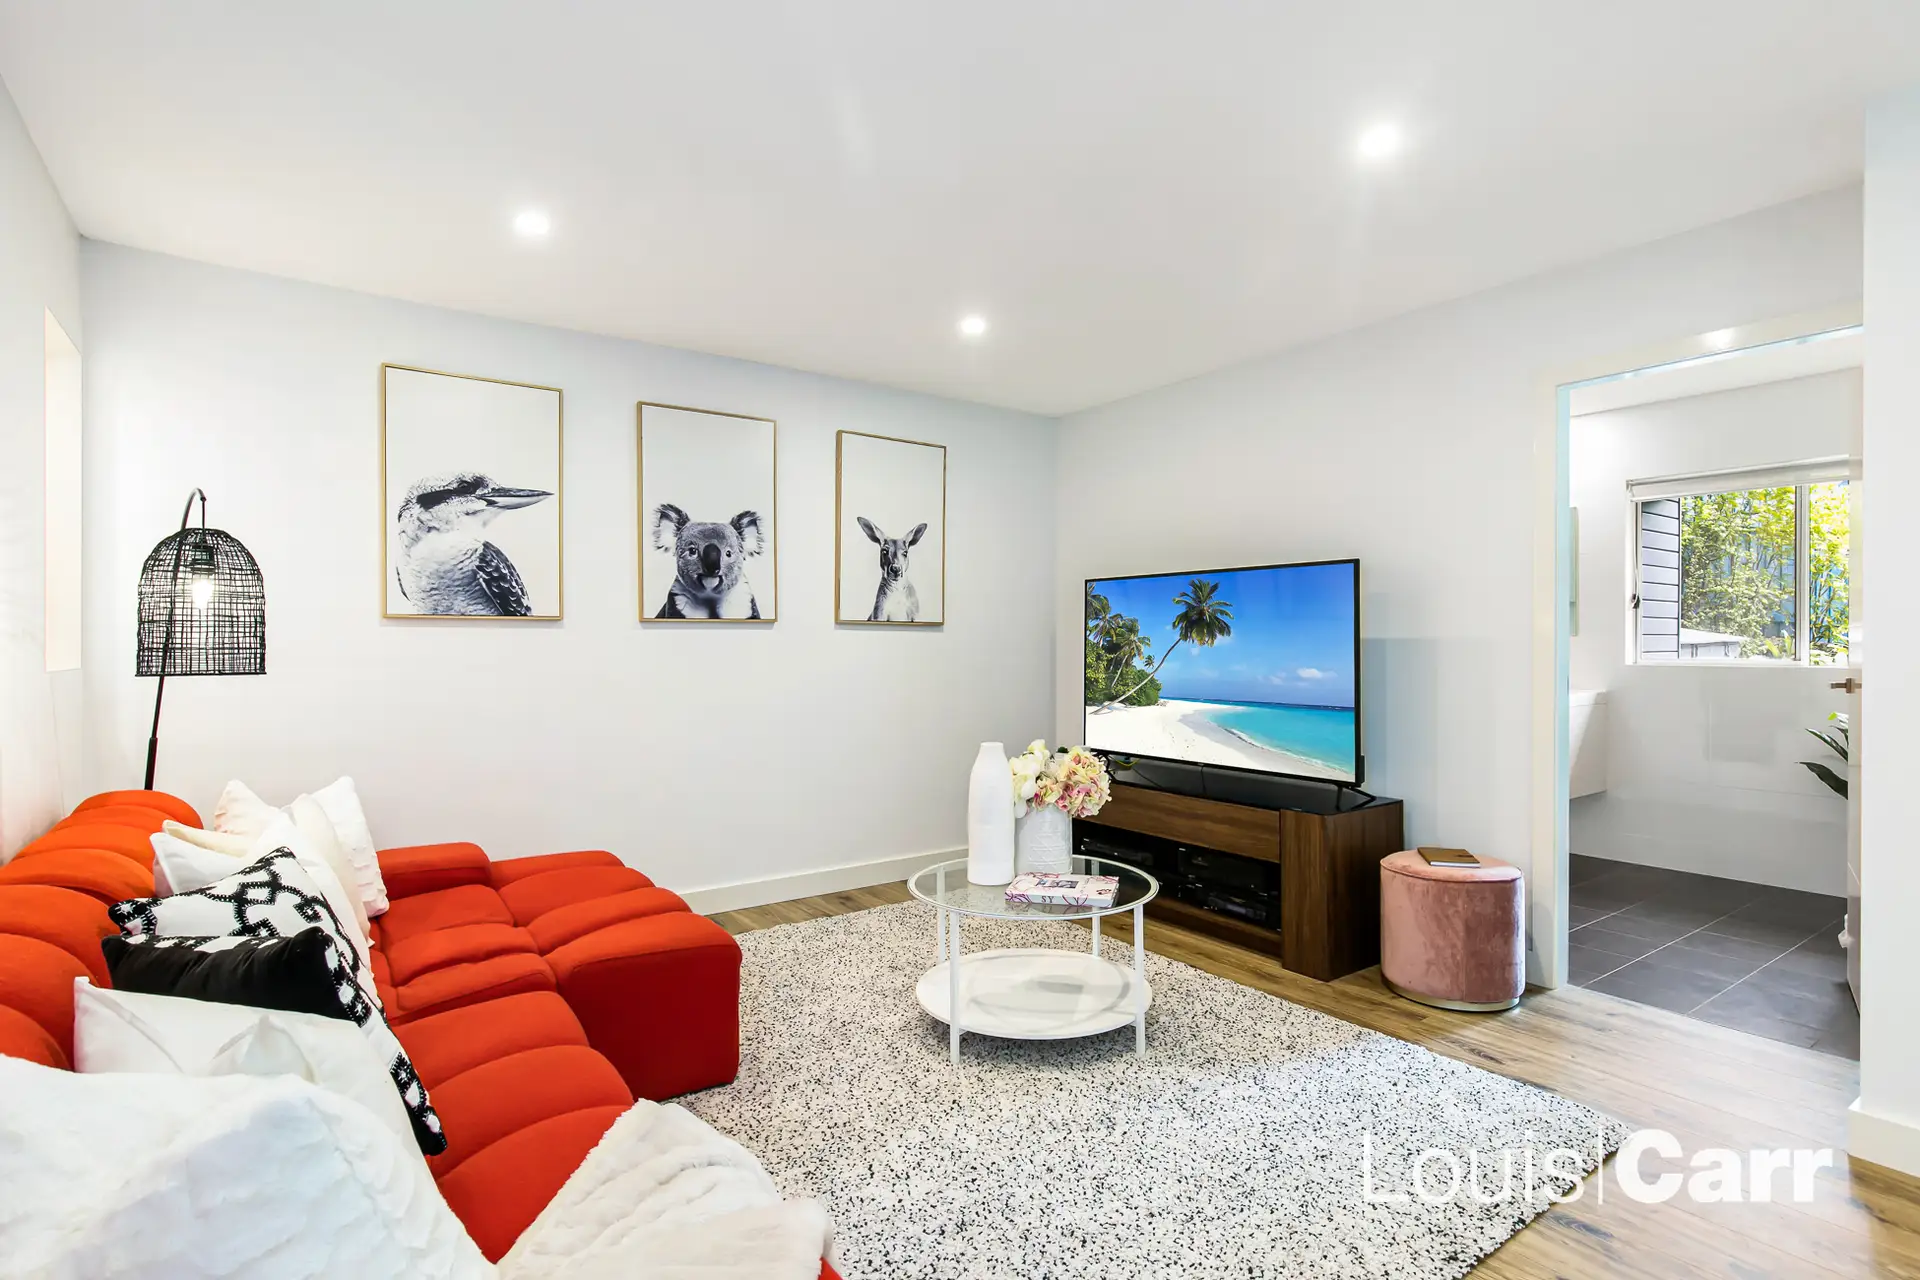 14 Ivy Place, Cherrybrook Sold by Louis Carr Real Estate - image 1